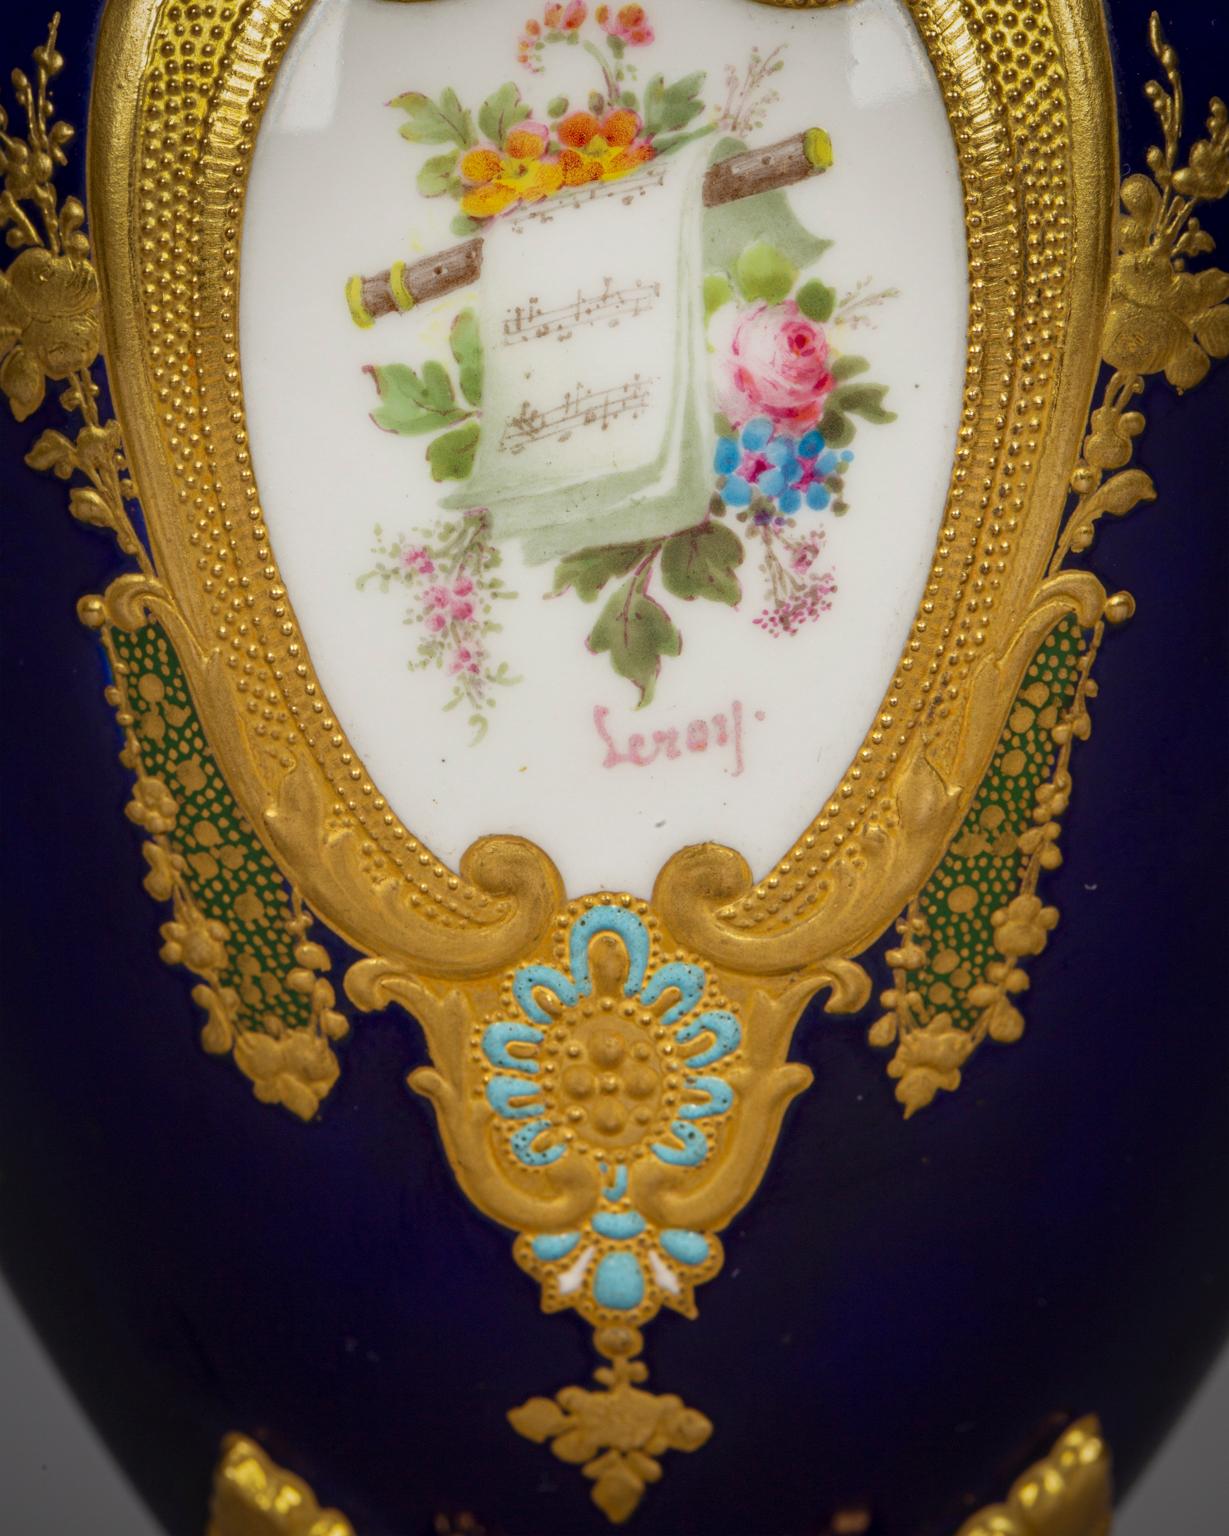 Signed Desire Leroy. Désiré Leroy apprenticed at the Sèvres factory in the mid 19th century. At the age of 38, he moved from France to take an appointment at Minton. In 1890, he was engaged and given his own studio by Royal Crown Derby Porcelain